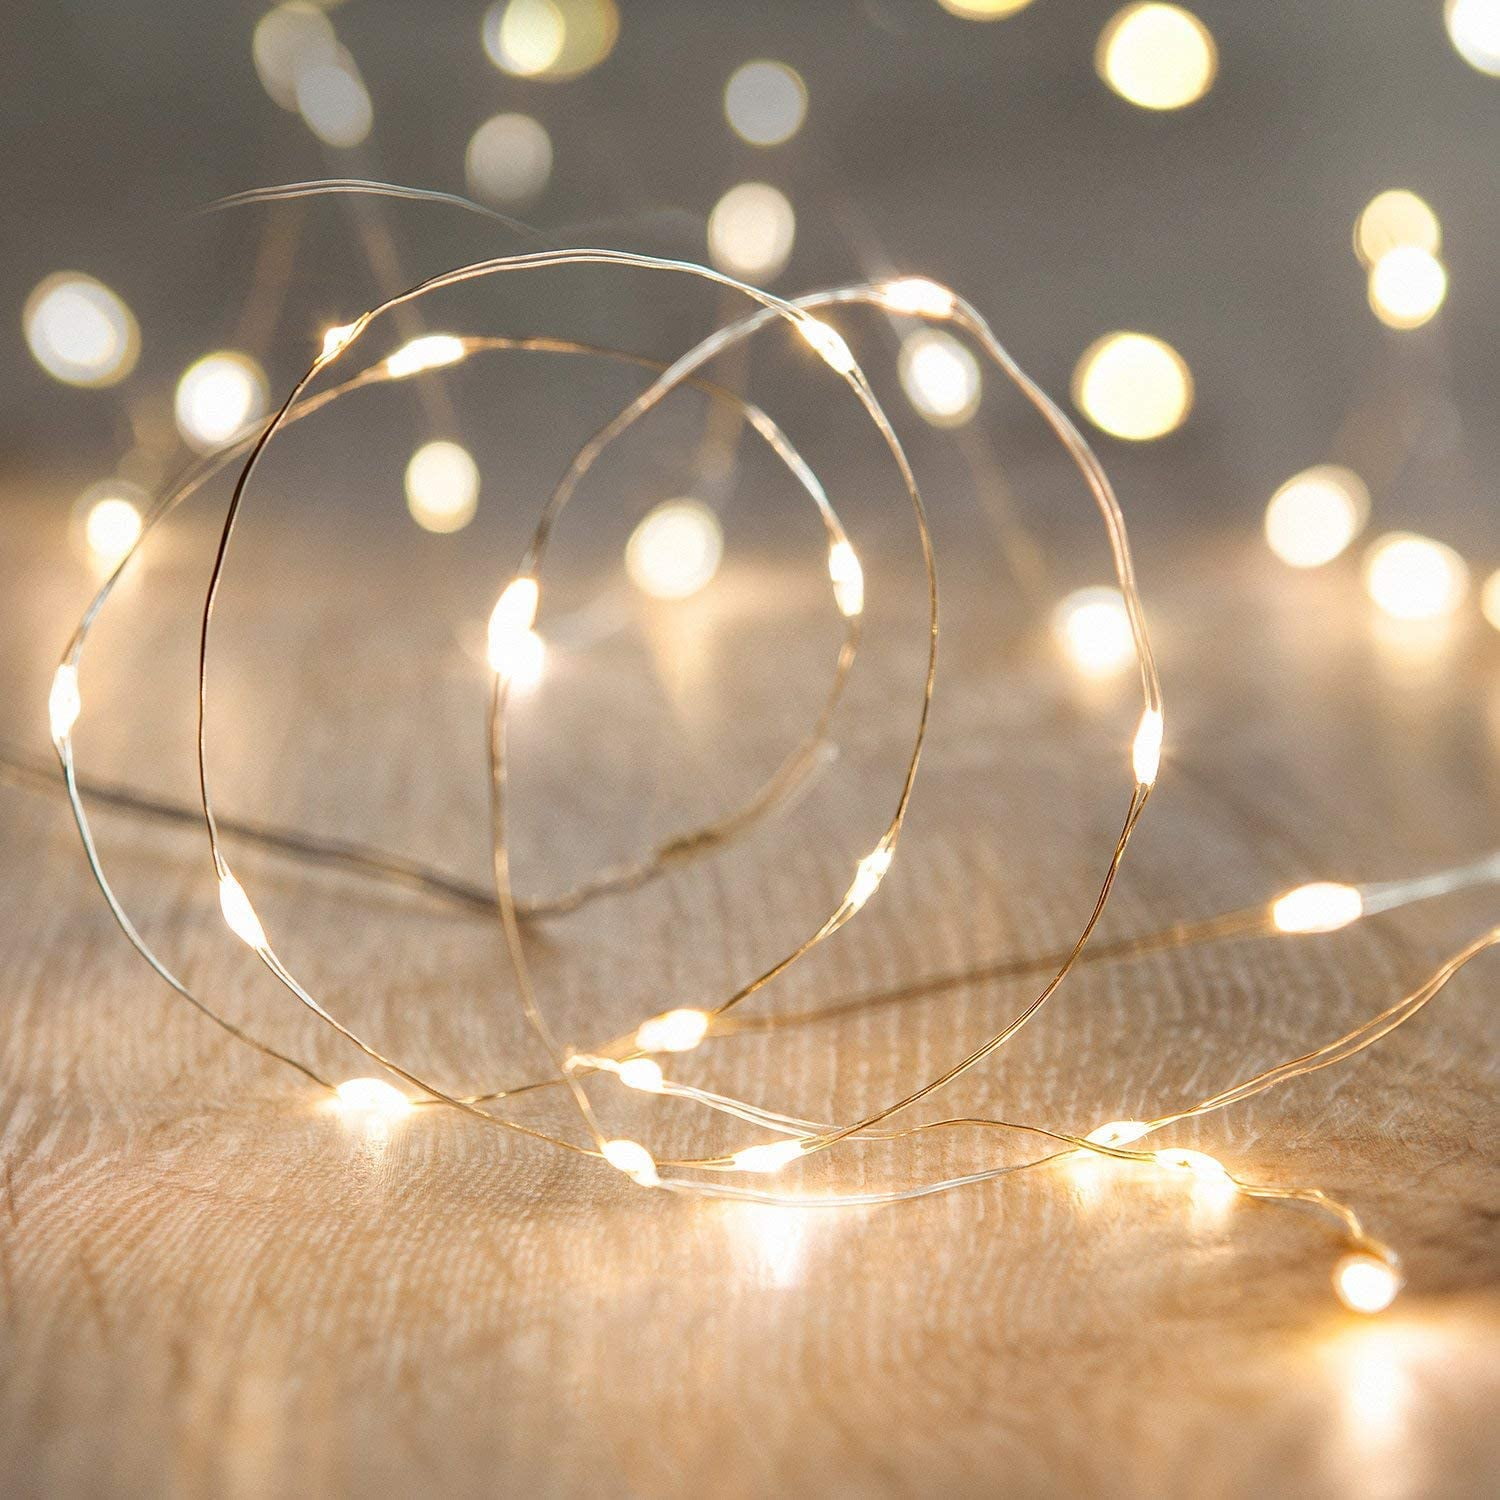 5M LED Silver Wire Fairy Starry String Lights DC 12V Indoor/Outdoor Decors US/CA 